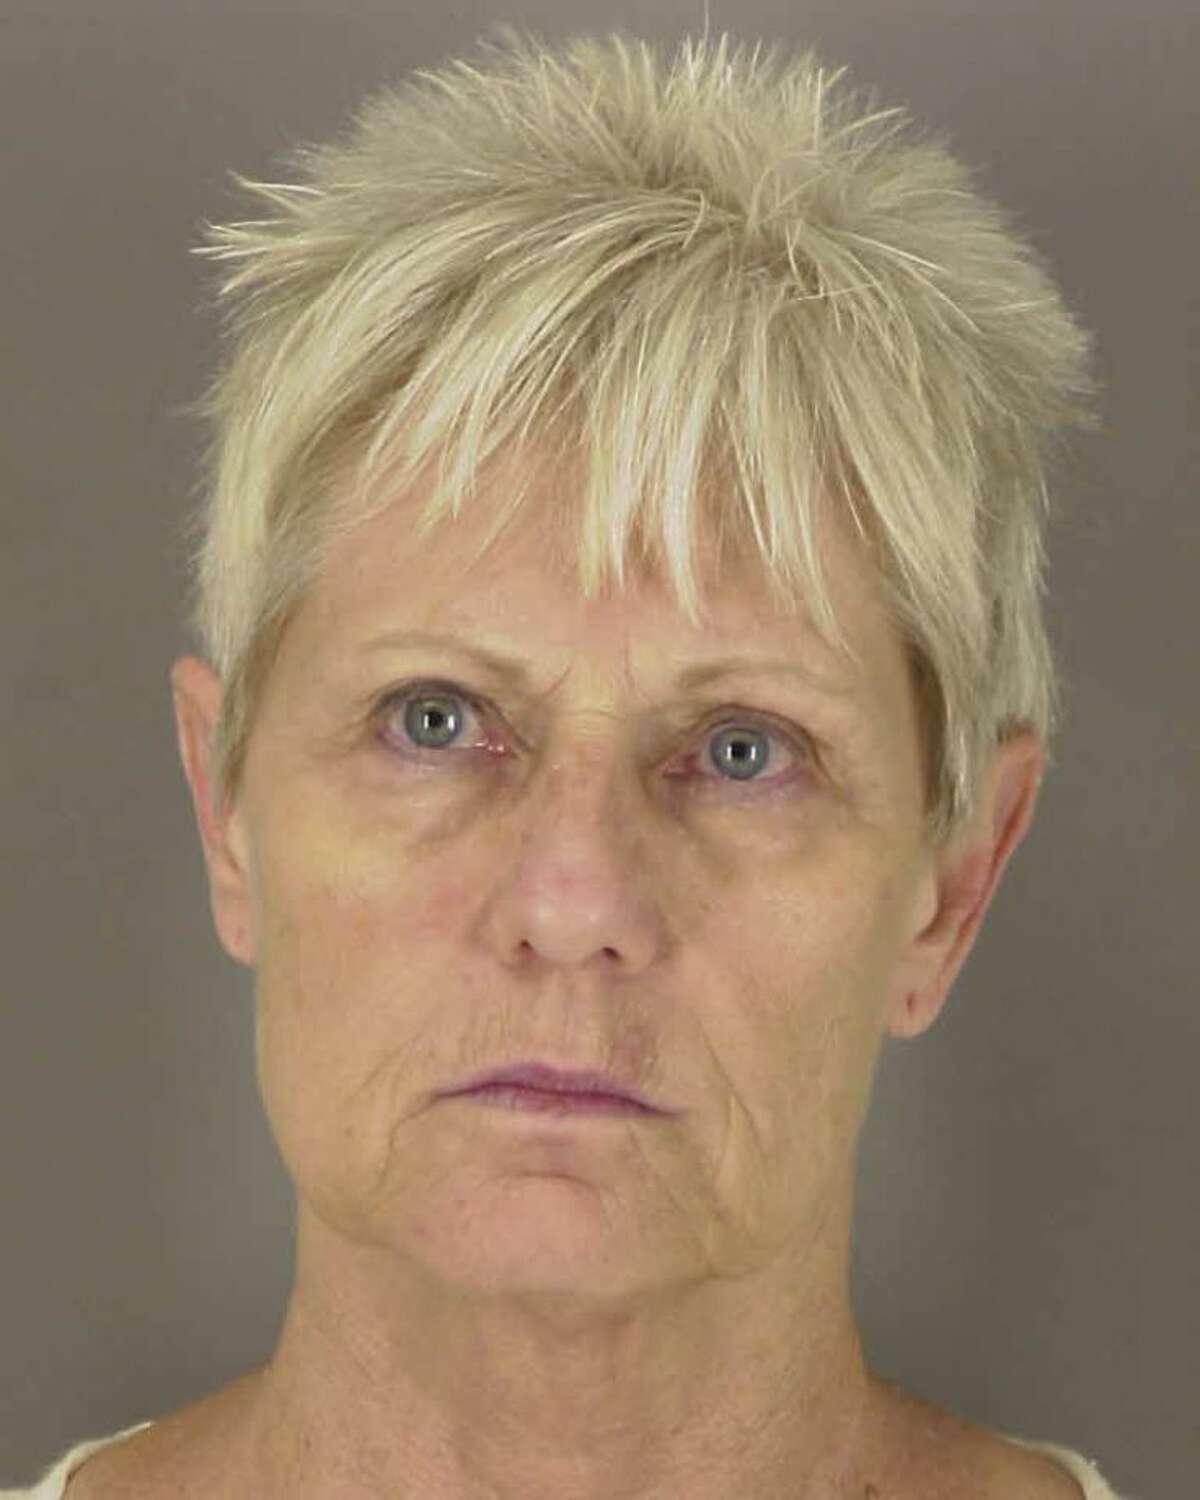 Peggy Lynn Gibson, 64, was sentenced to 15 years in prison for stealing hundreds of thousands from the nonprofit Triangle Arean Network.